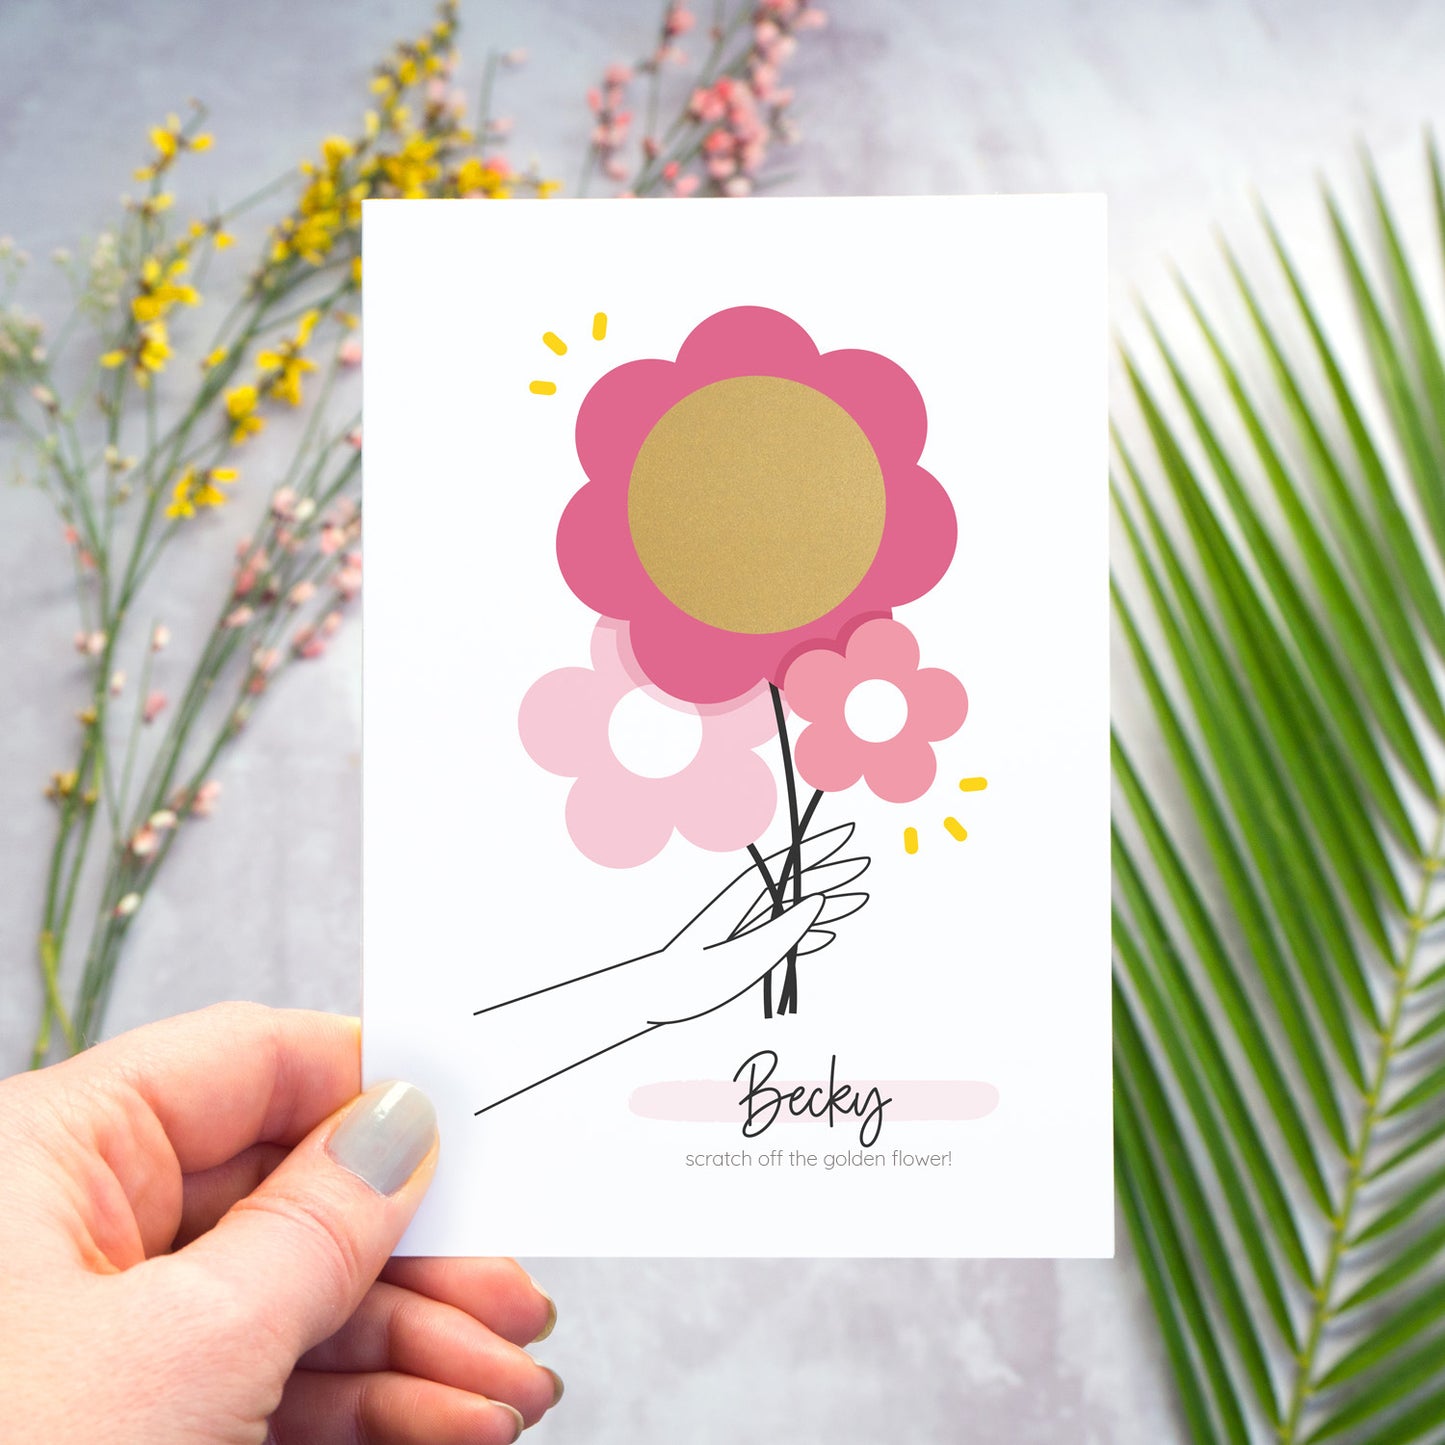 This image shows how the personalised question scratch card looks before the recipient scratches away the flowers inner circle. In this image the card is being held over a grey surface which has a variety of colour flowers and foliage in the background. The heart has not yet been scratched away.